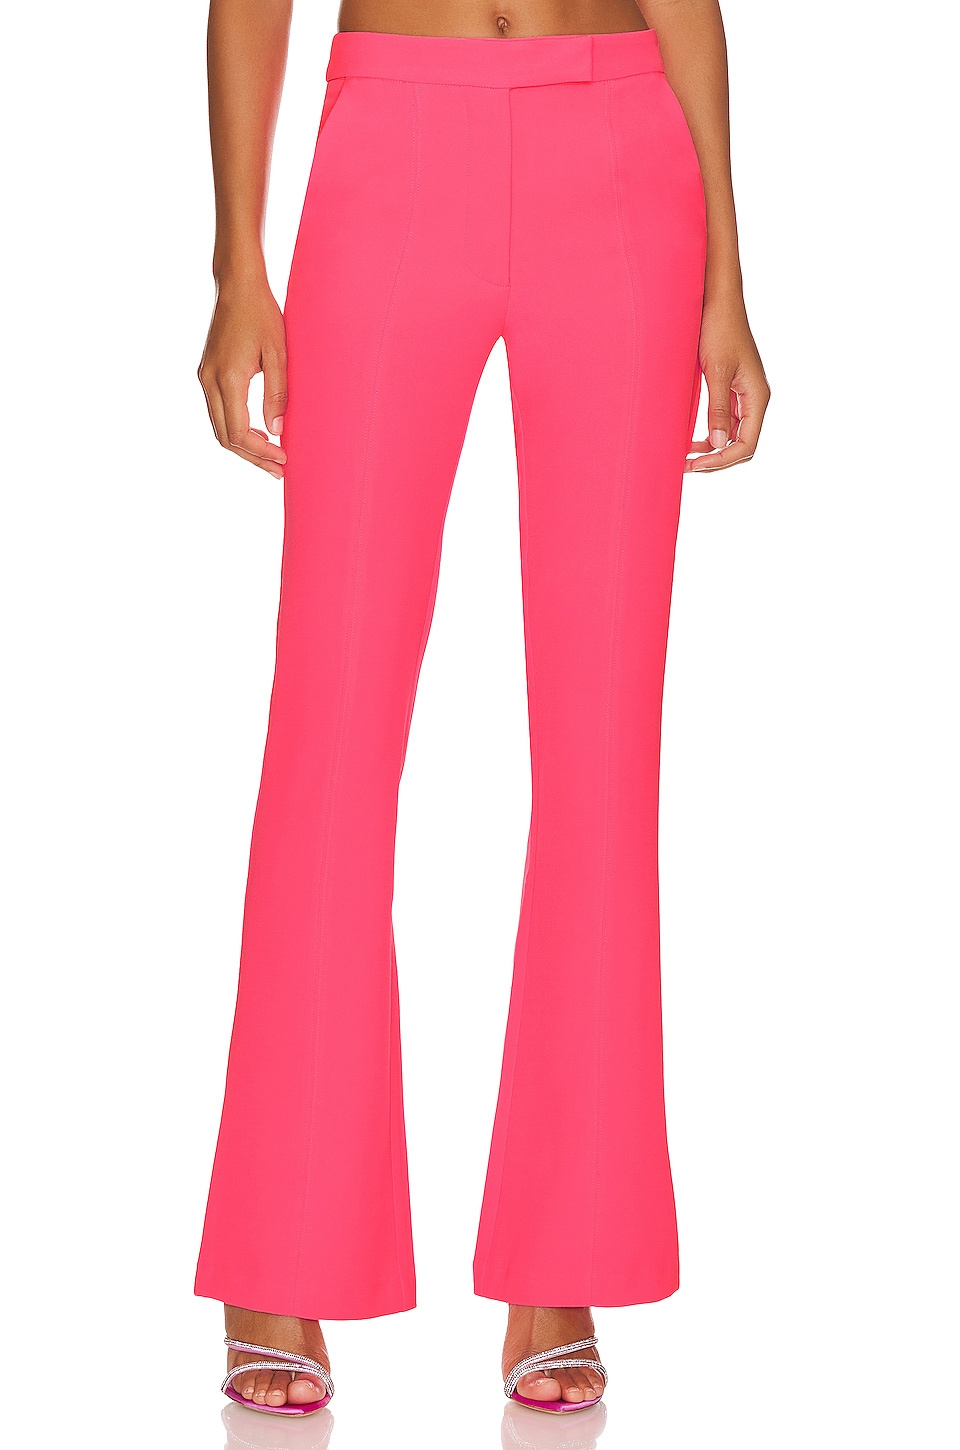 For The Love Of Pink Flare Pants